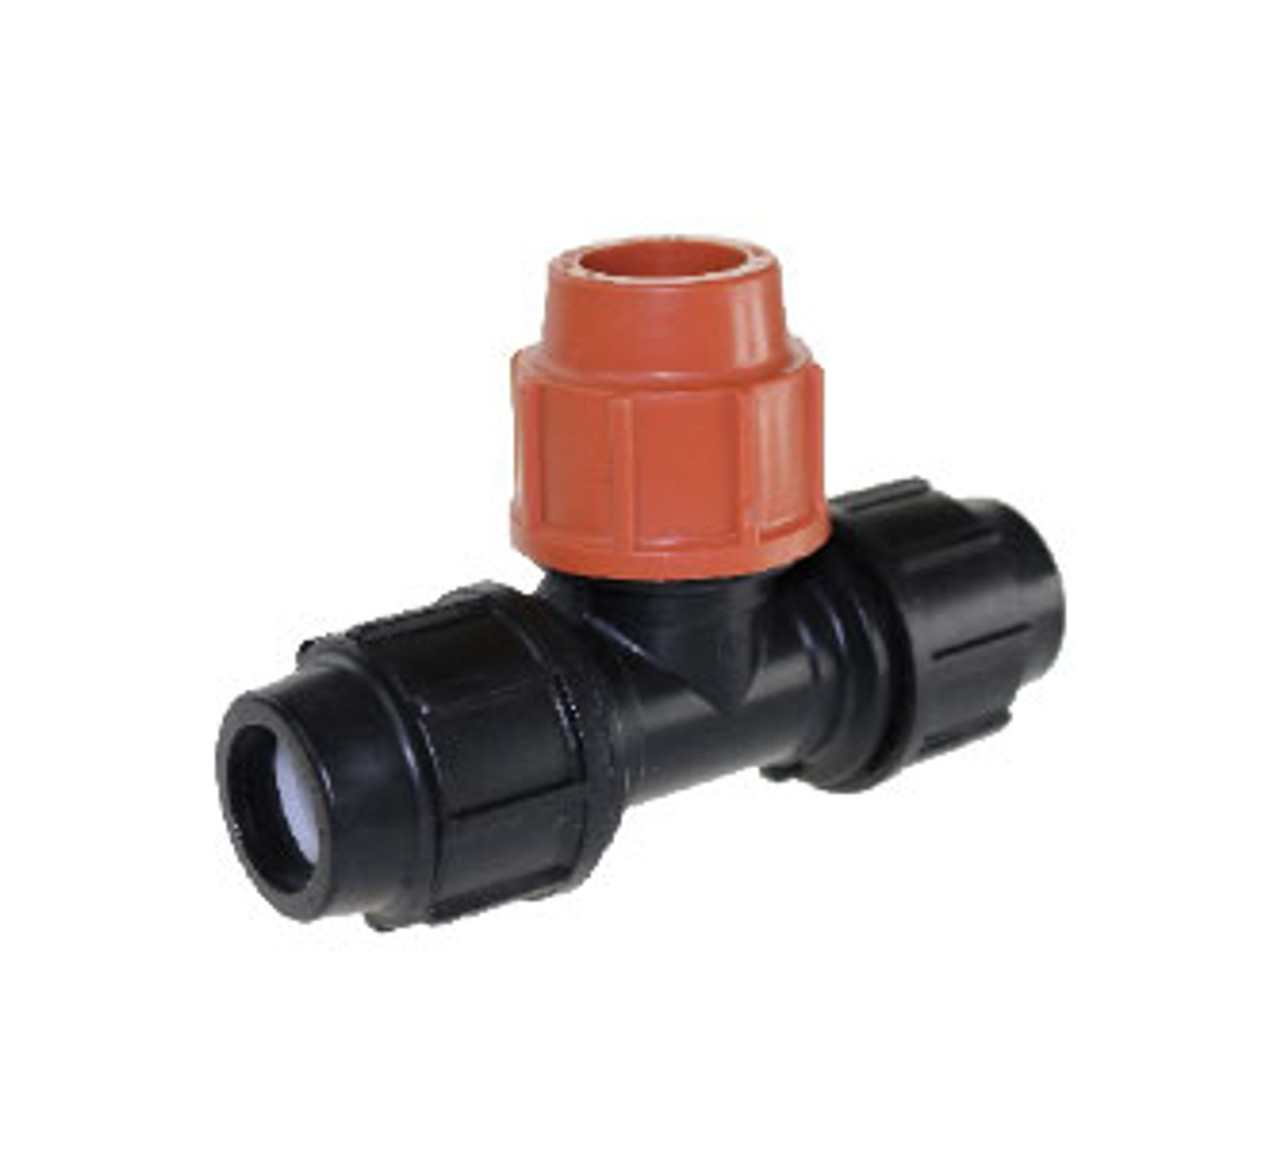 UltraAir Metric Compression 90 Degree Tee Connector - Poly to Copper 32 x 25